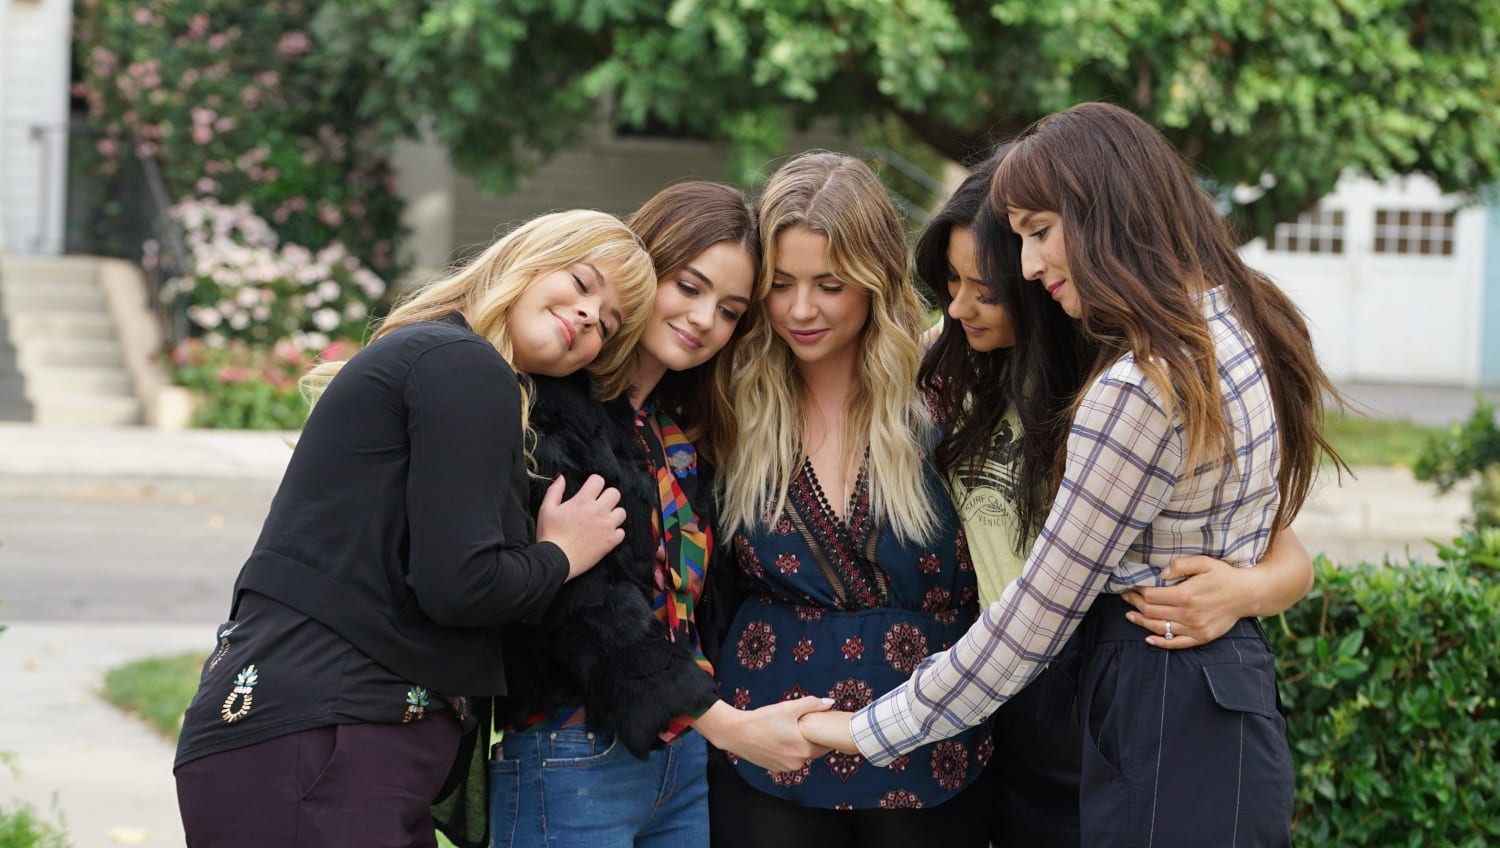 Fans are pretty upset that 'Pretty Little Liars' is leaving Netflix: 'No one asked for this'